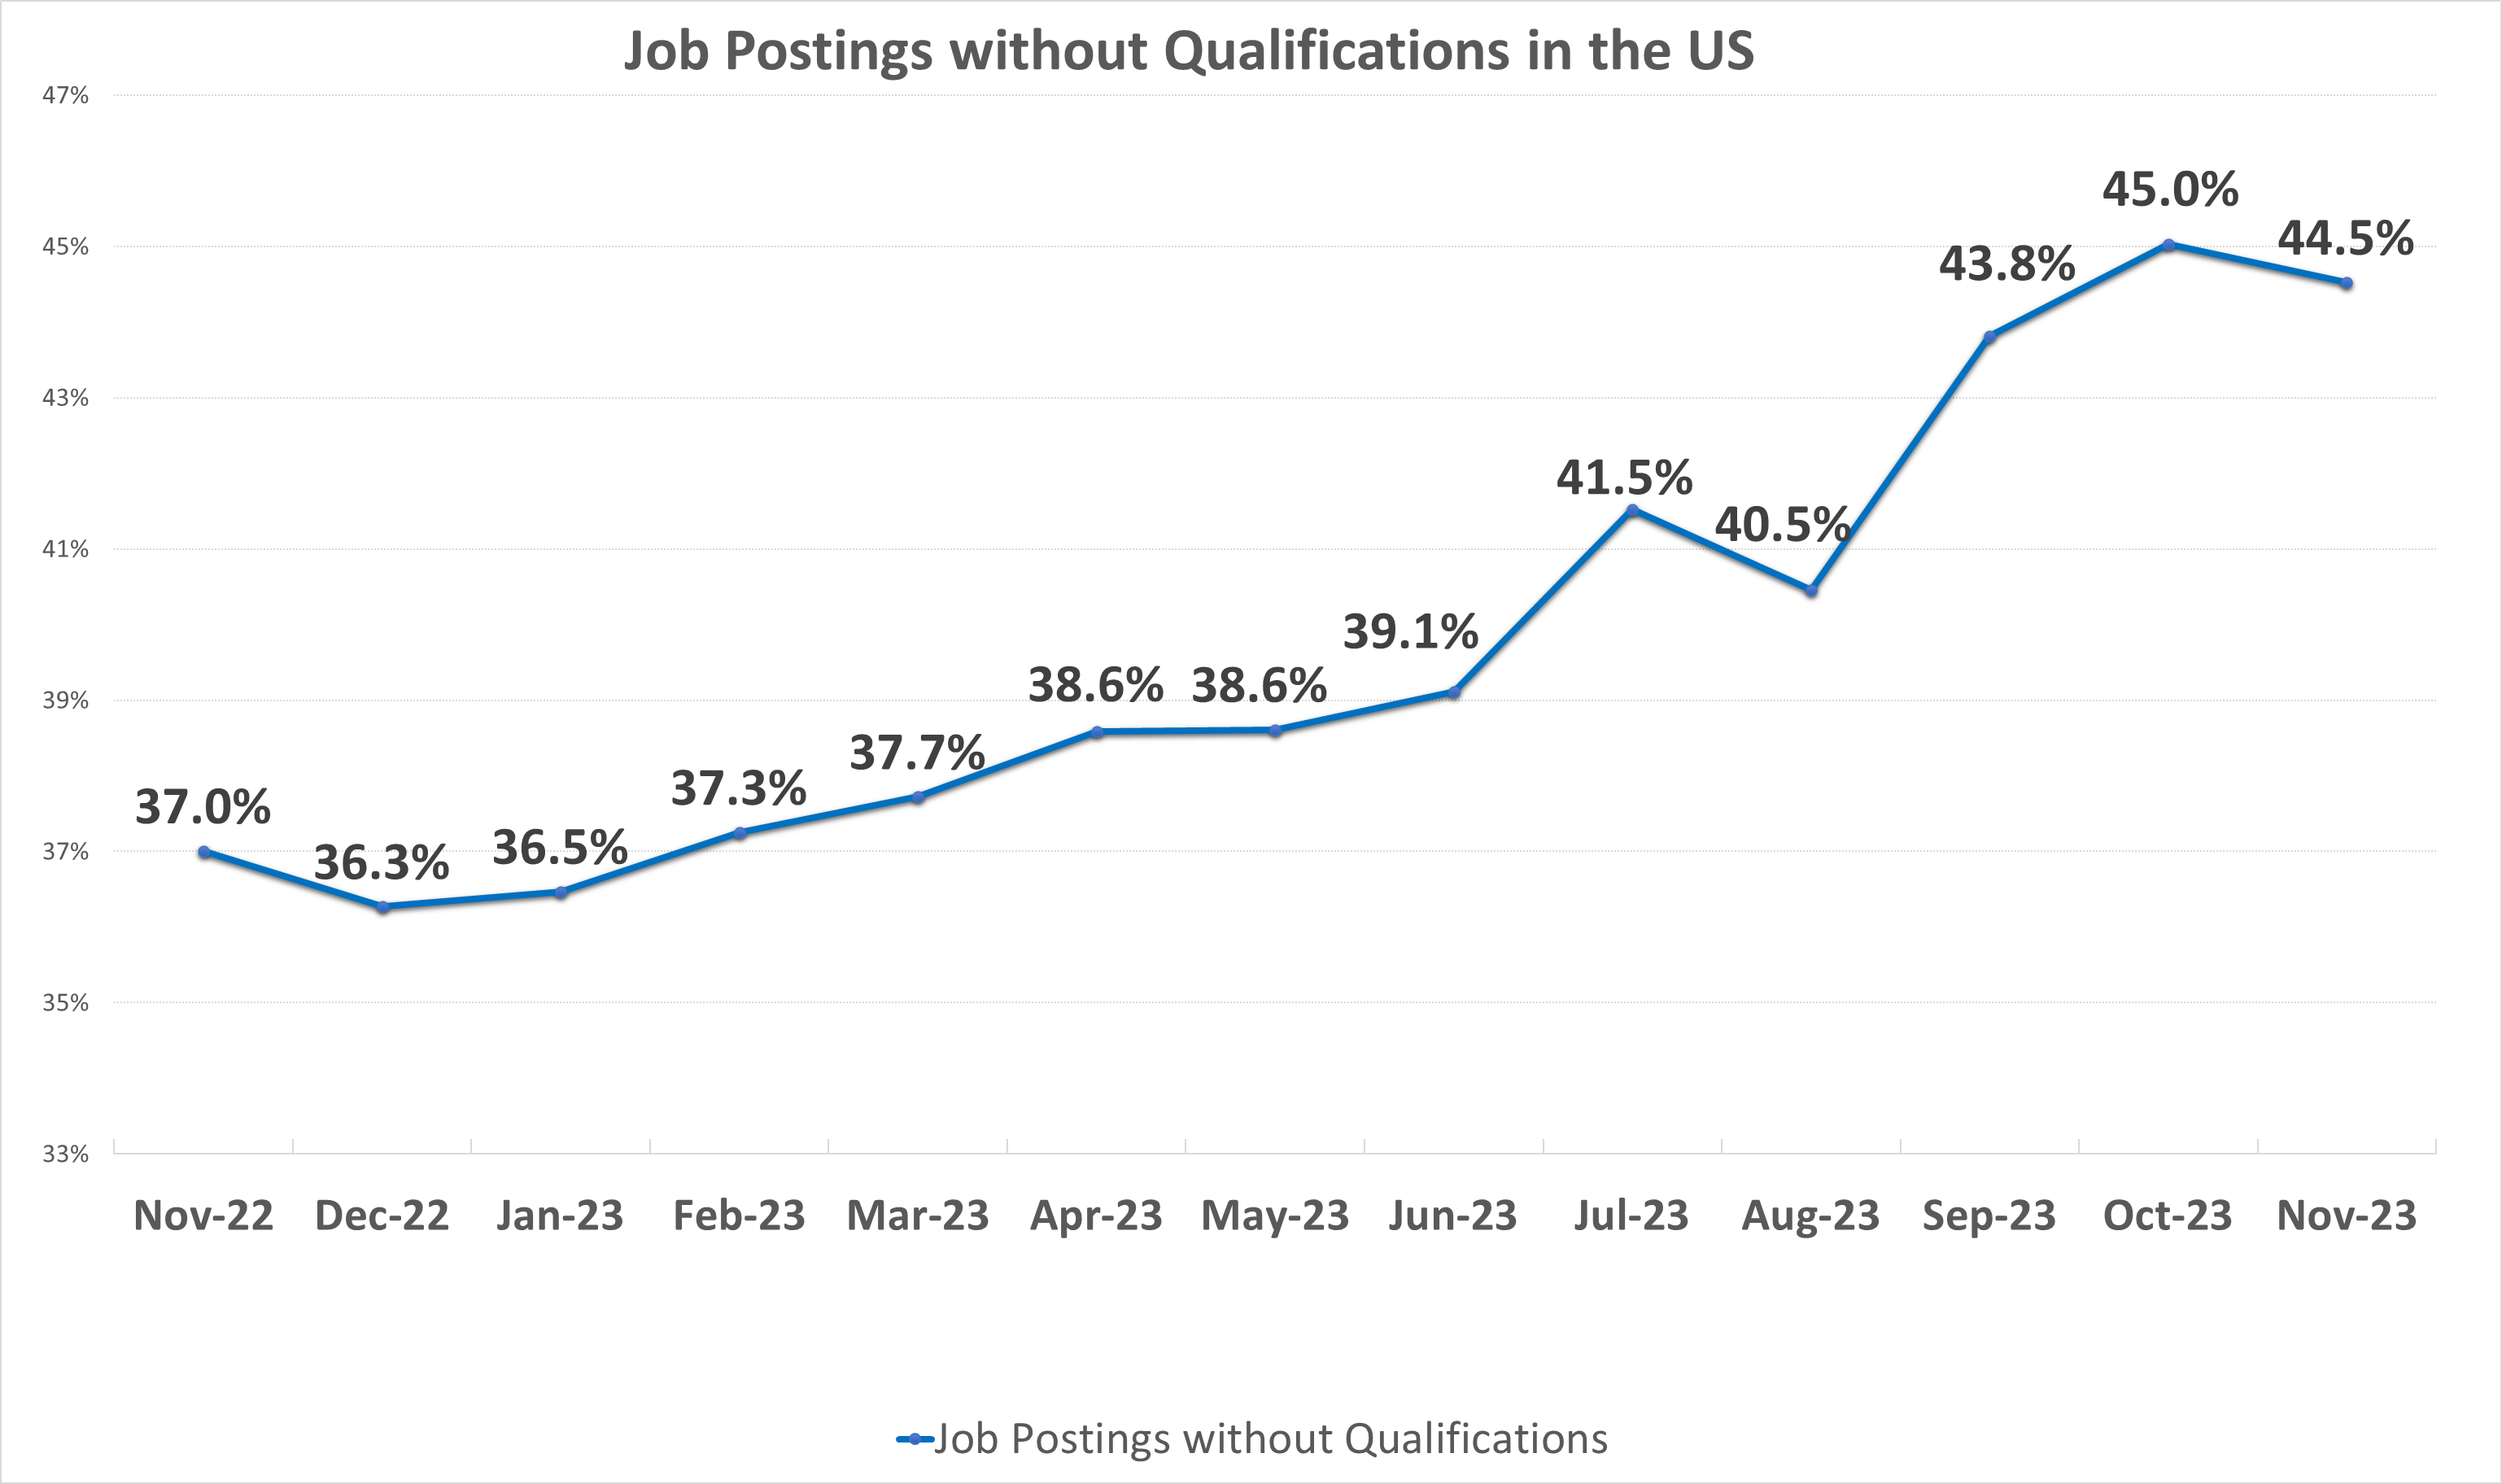 Chart from Claro showing the number of job postings in the US without qualifications